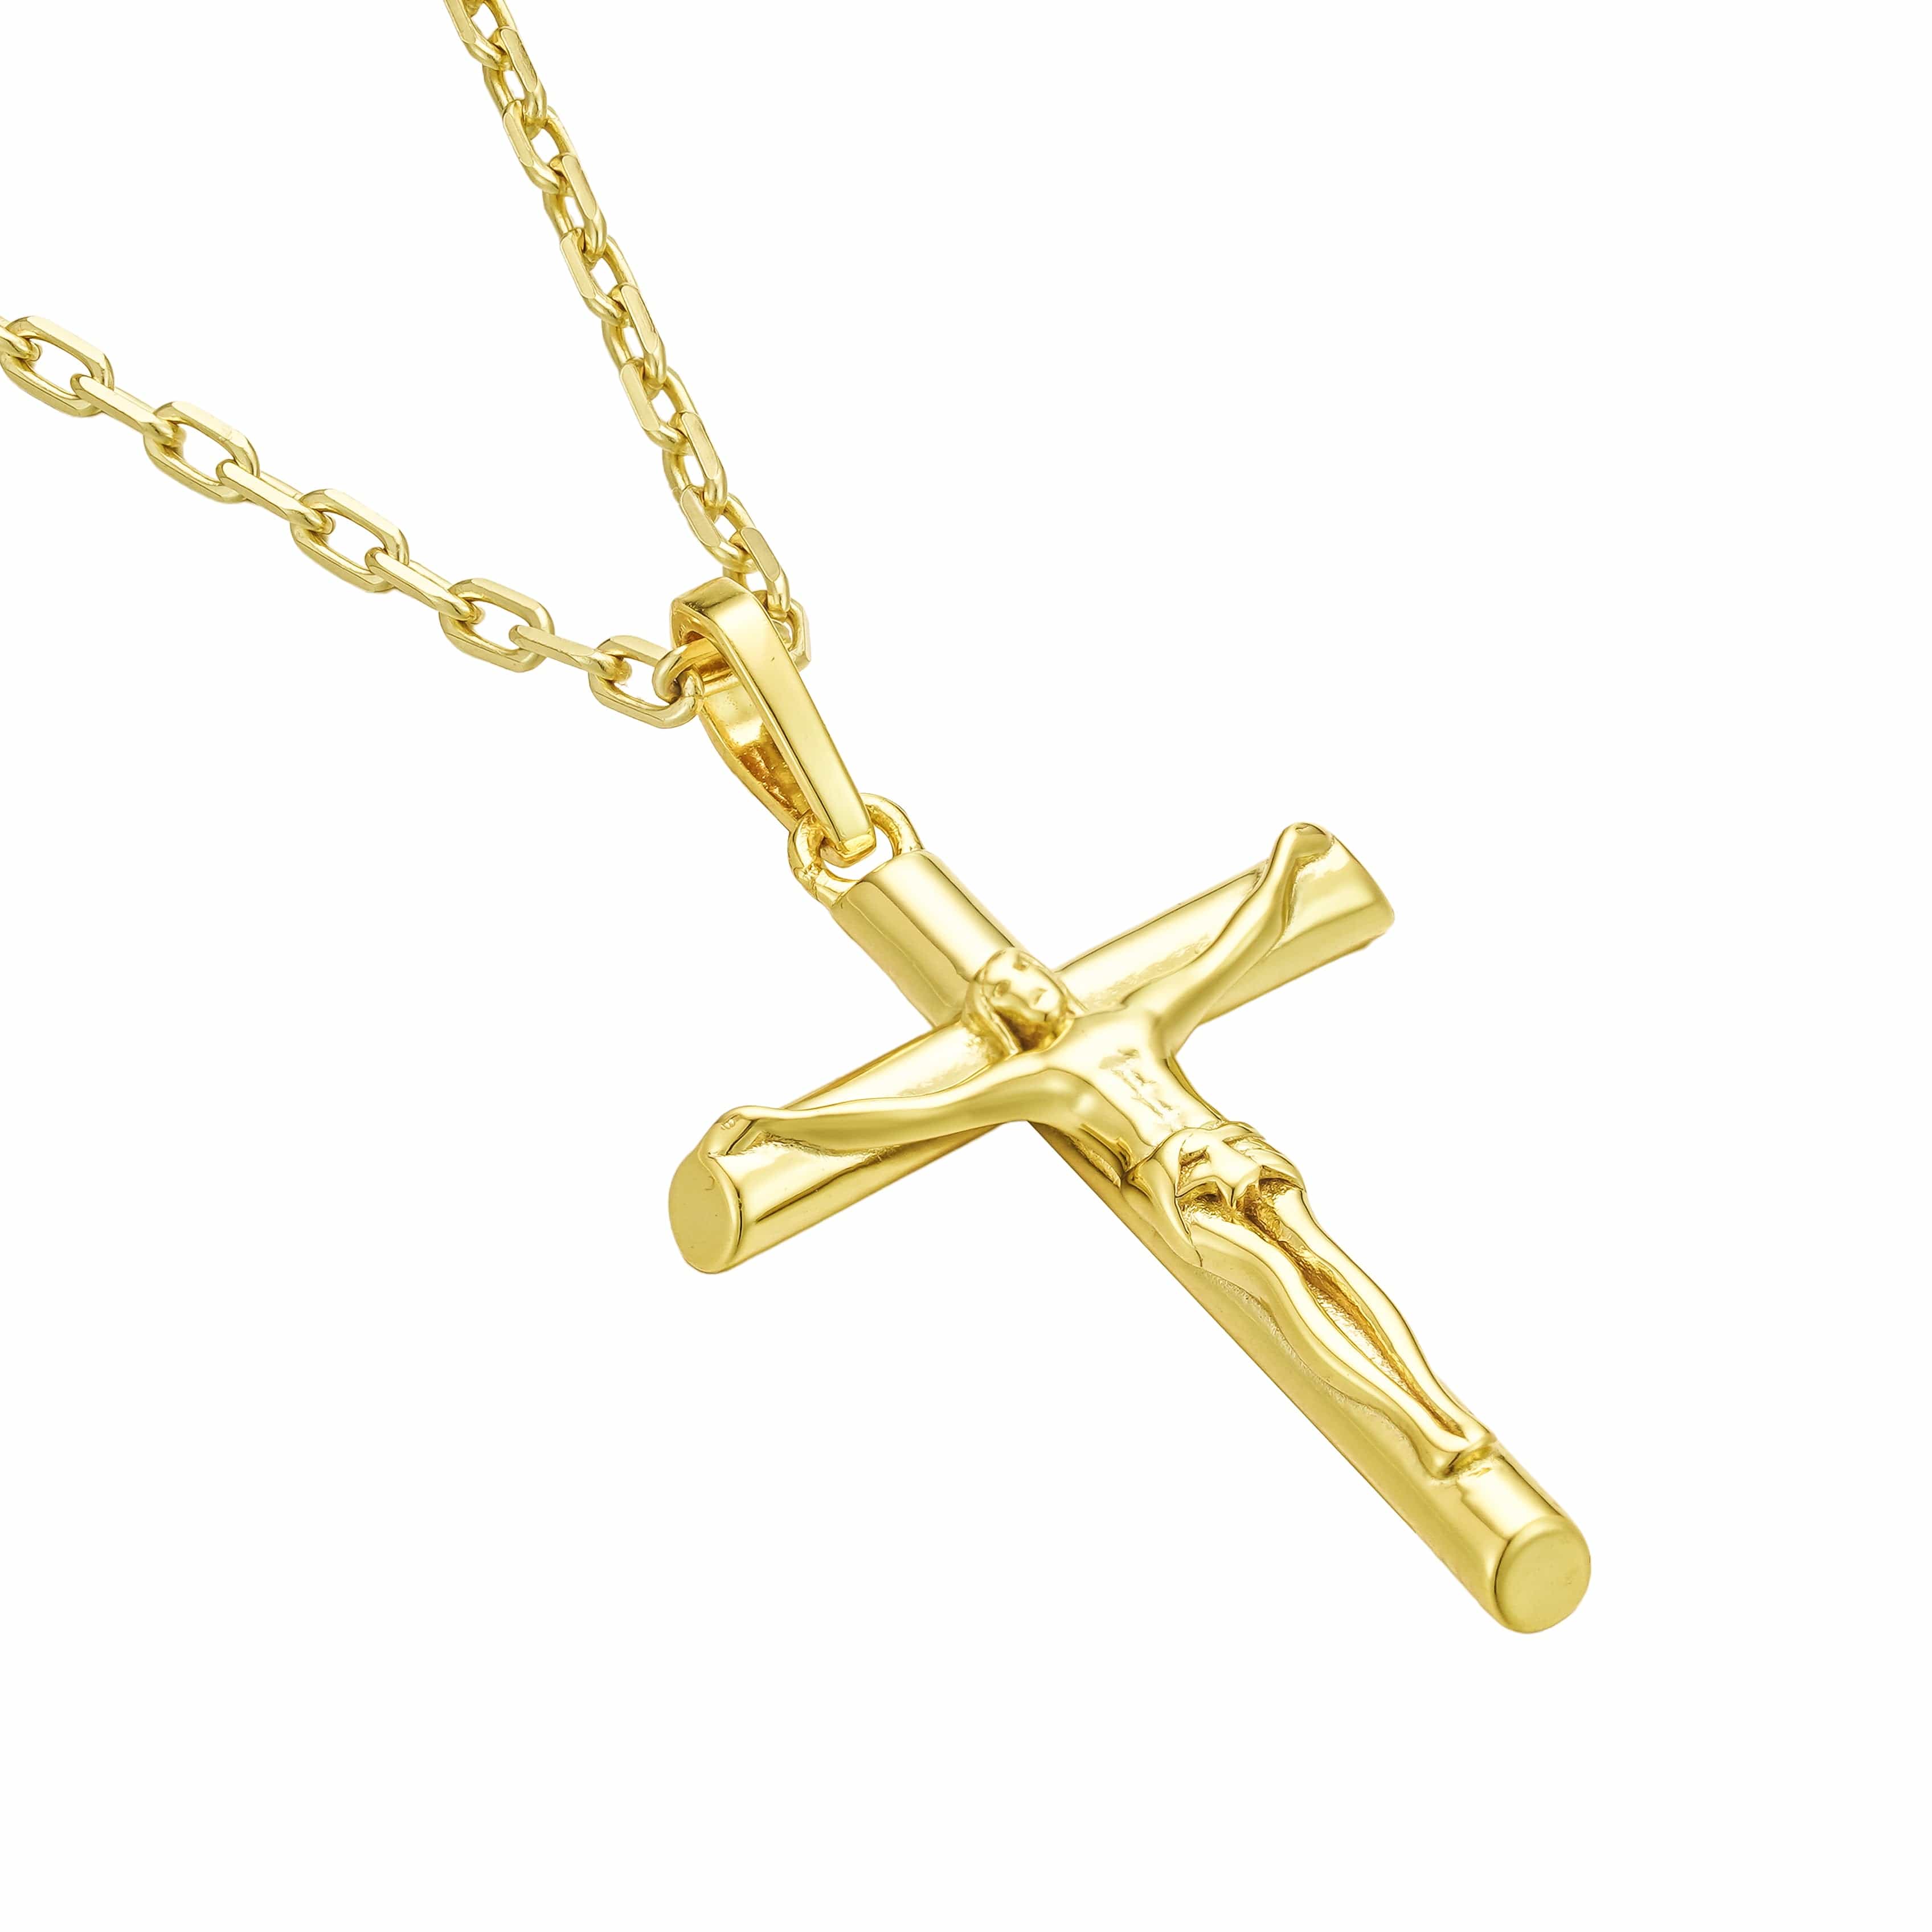 Sleek and Timeless - 14k Gold Dipped Crucifix Pendant with Cable Chain